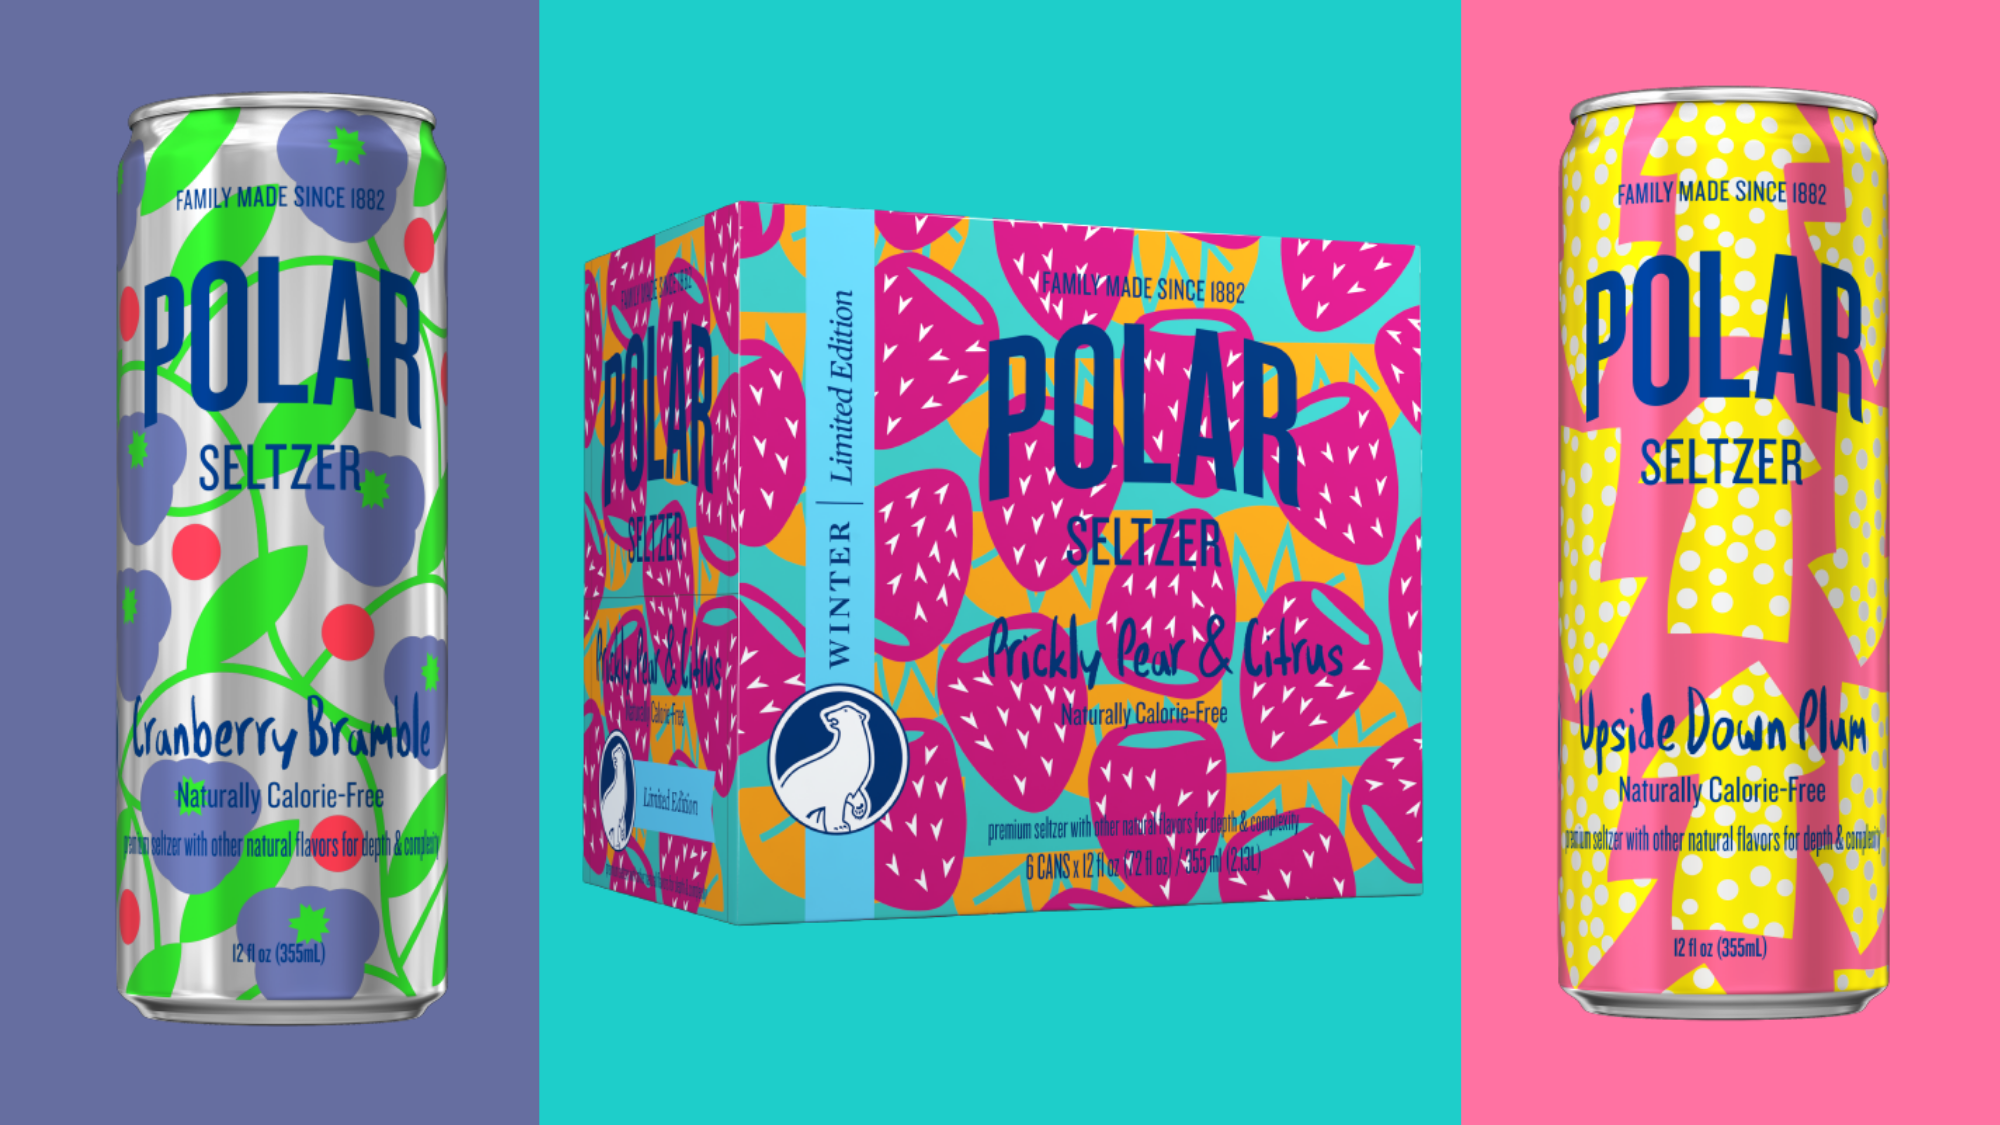 Polar Seltzer’s 2021 winter flavors are now available